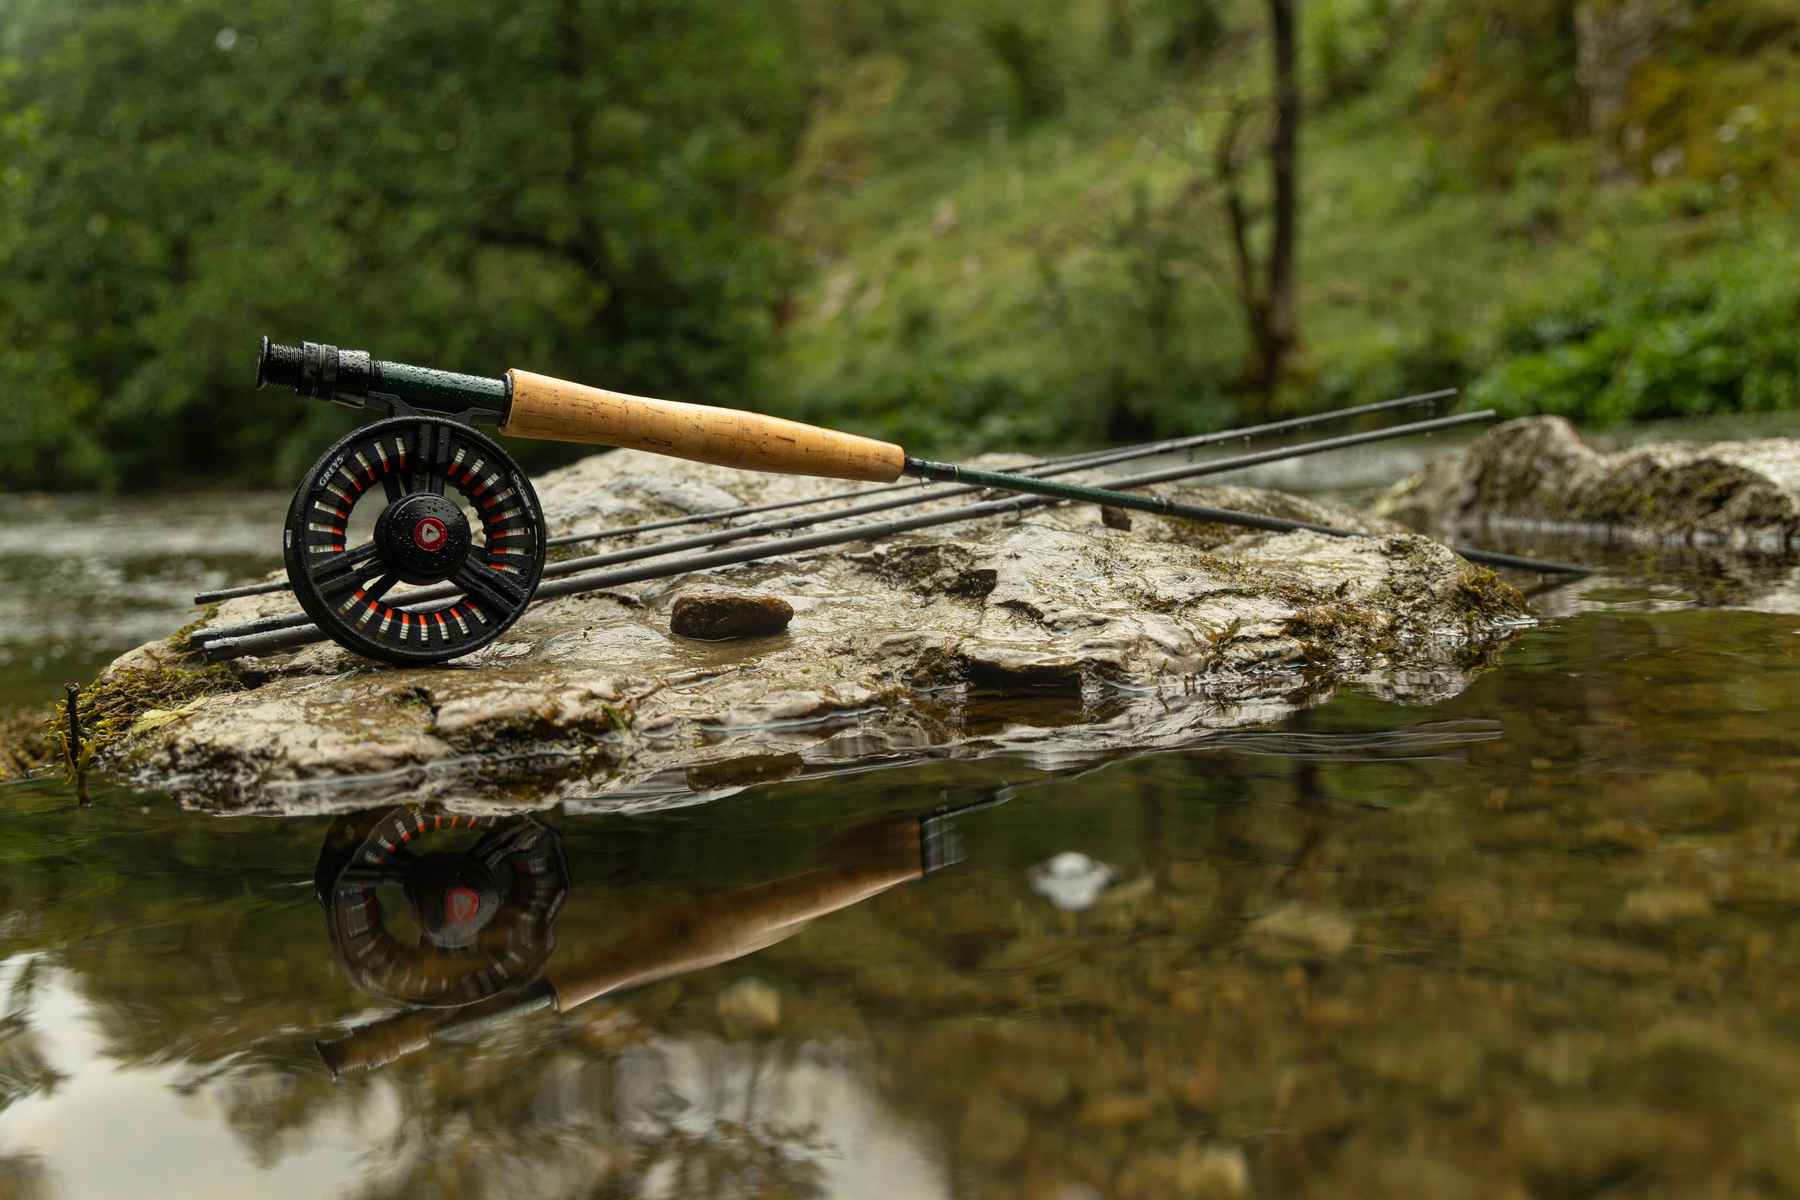 Greys introduces new, budget-friendly Cruise fly rod and reel combo kit